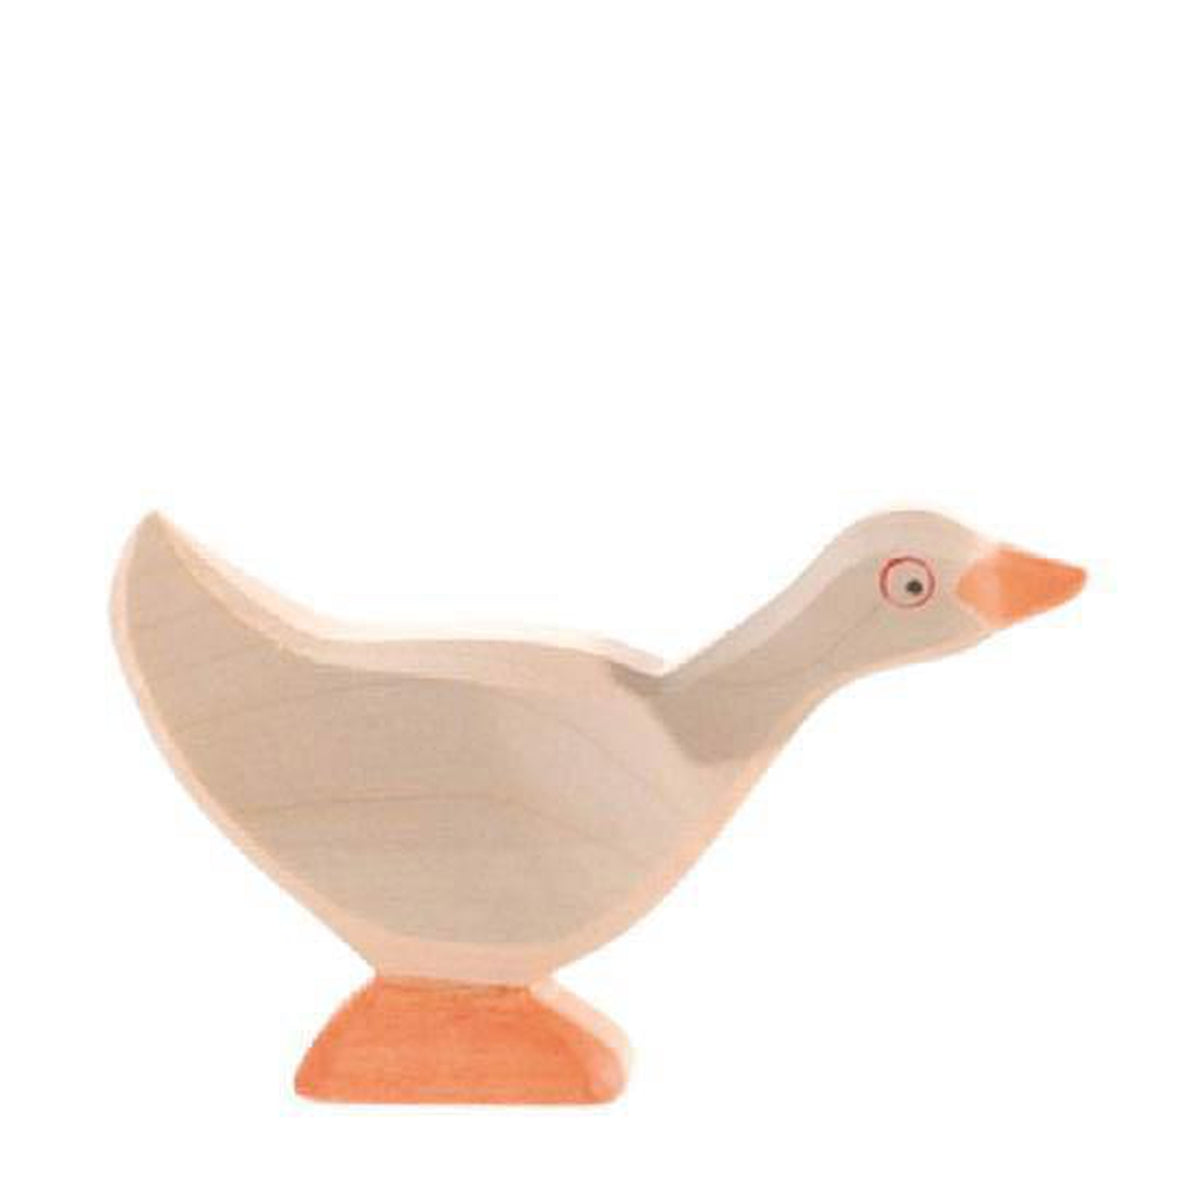 Ostheimer wooden goose - standing-people, animals & lands-Fire the Imagination-Dilly Dally Kids